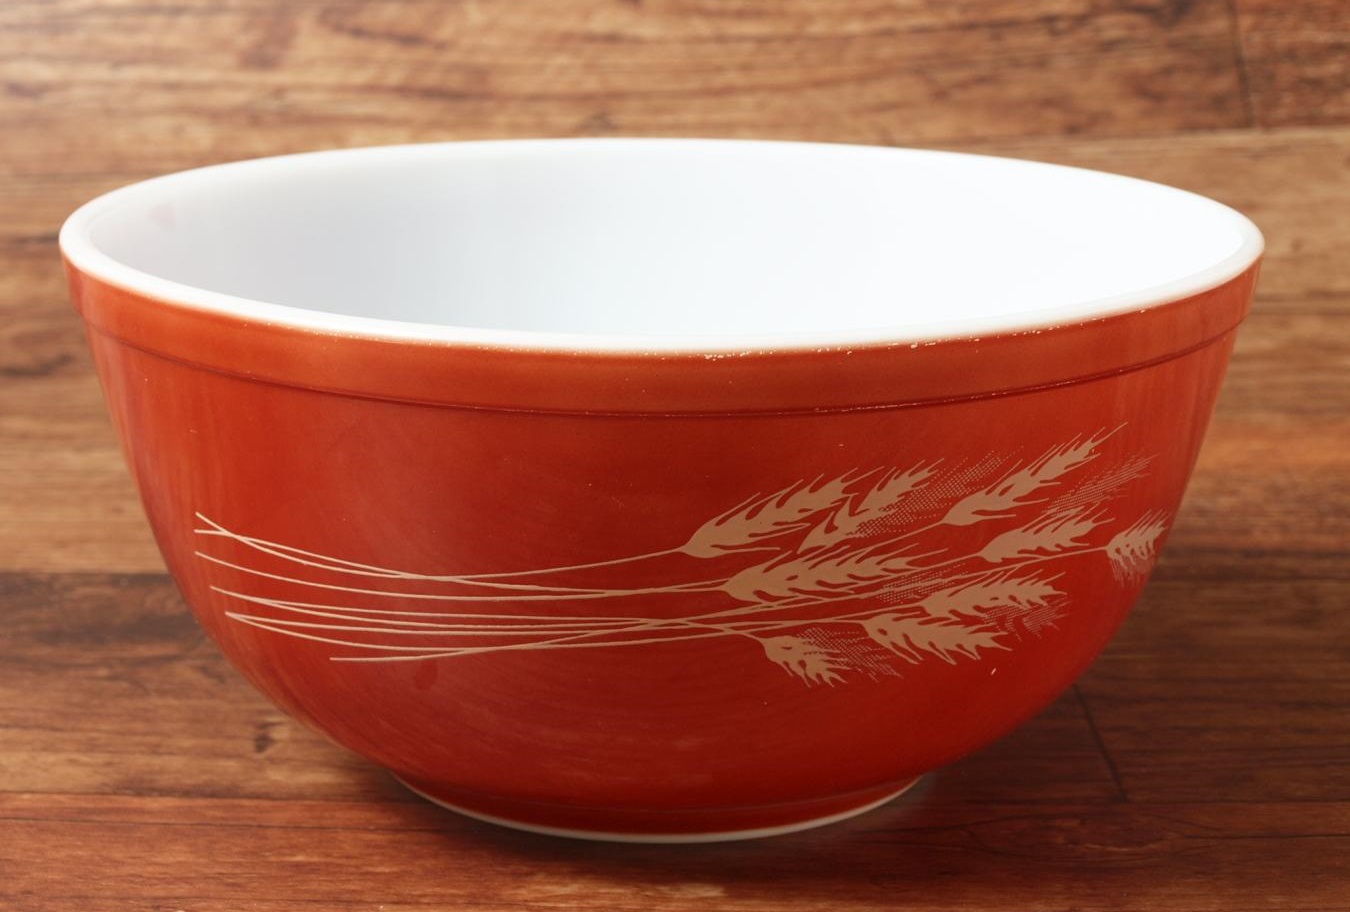 Vintage Clothing Jam Rakuten Global Market Vintage Antique and Amazing Old Fashioned Pyrex Mixing Bowls – the top reference